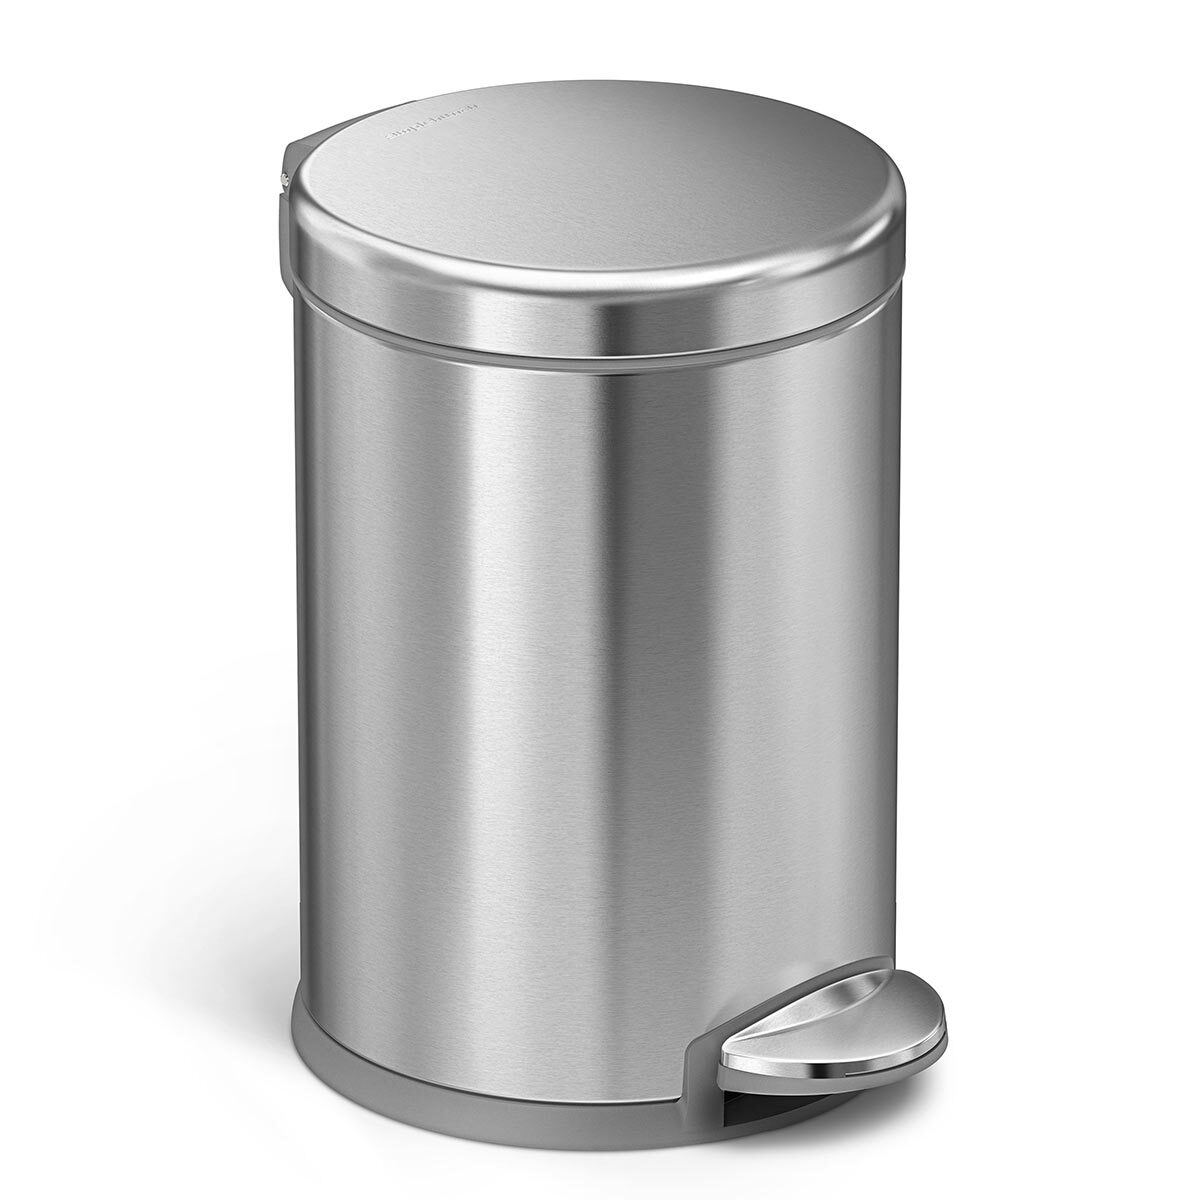 Cut out image of smaller bin on white background